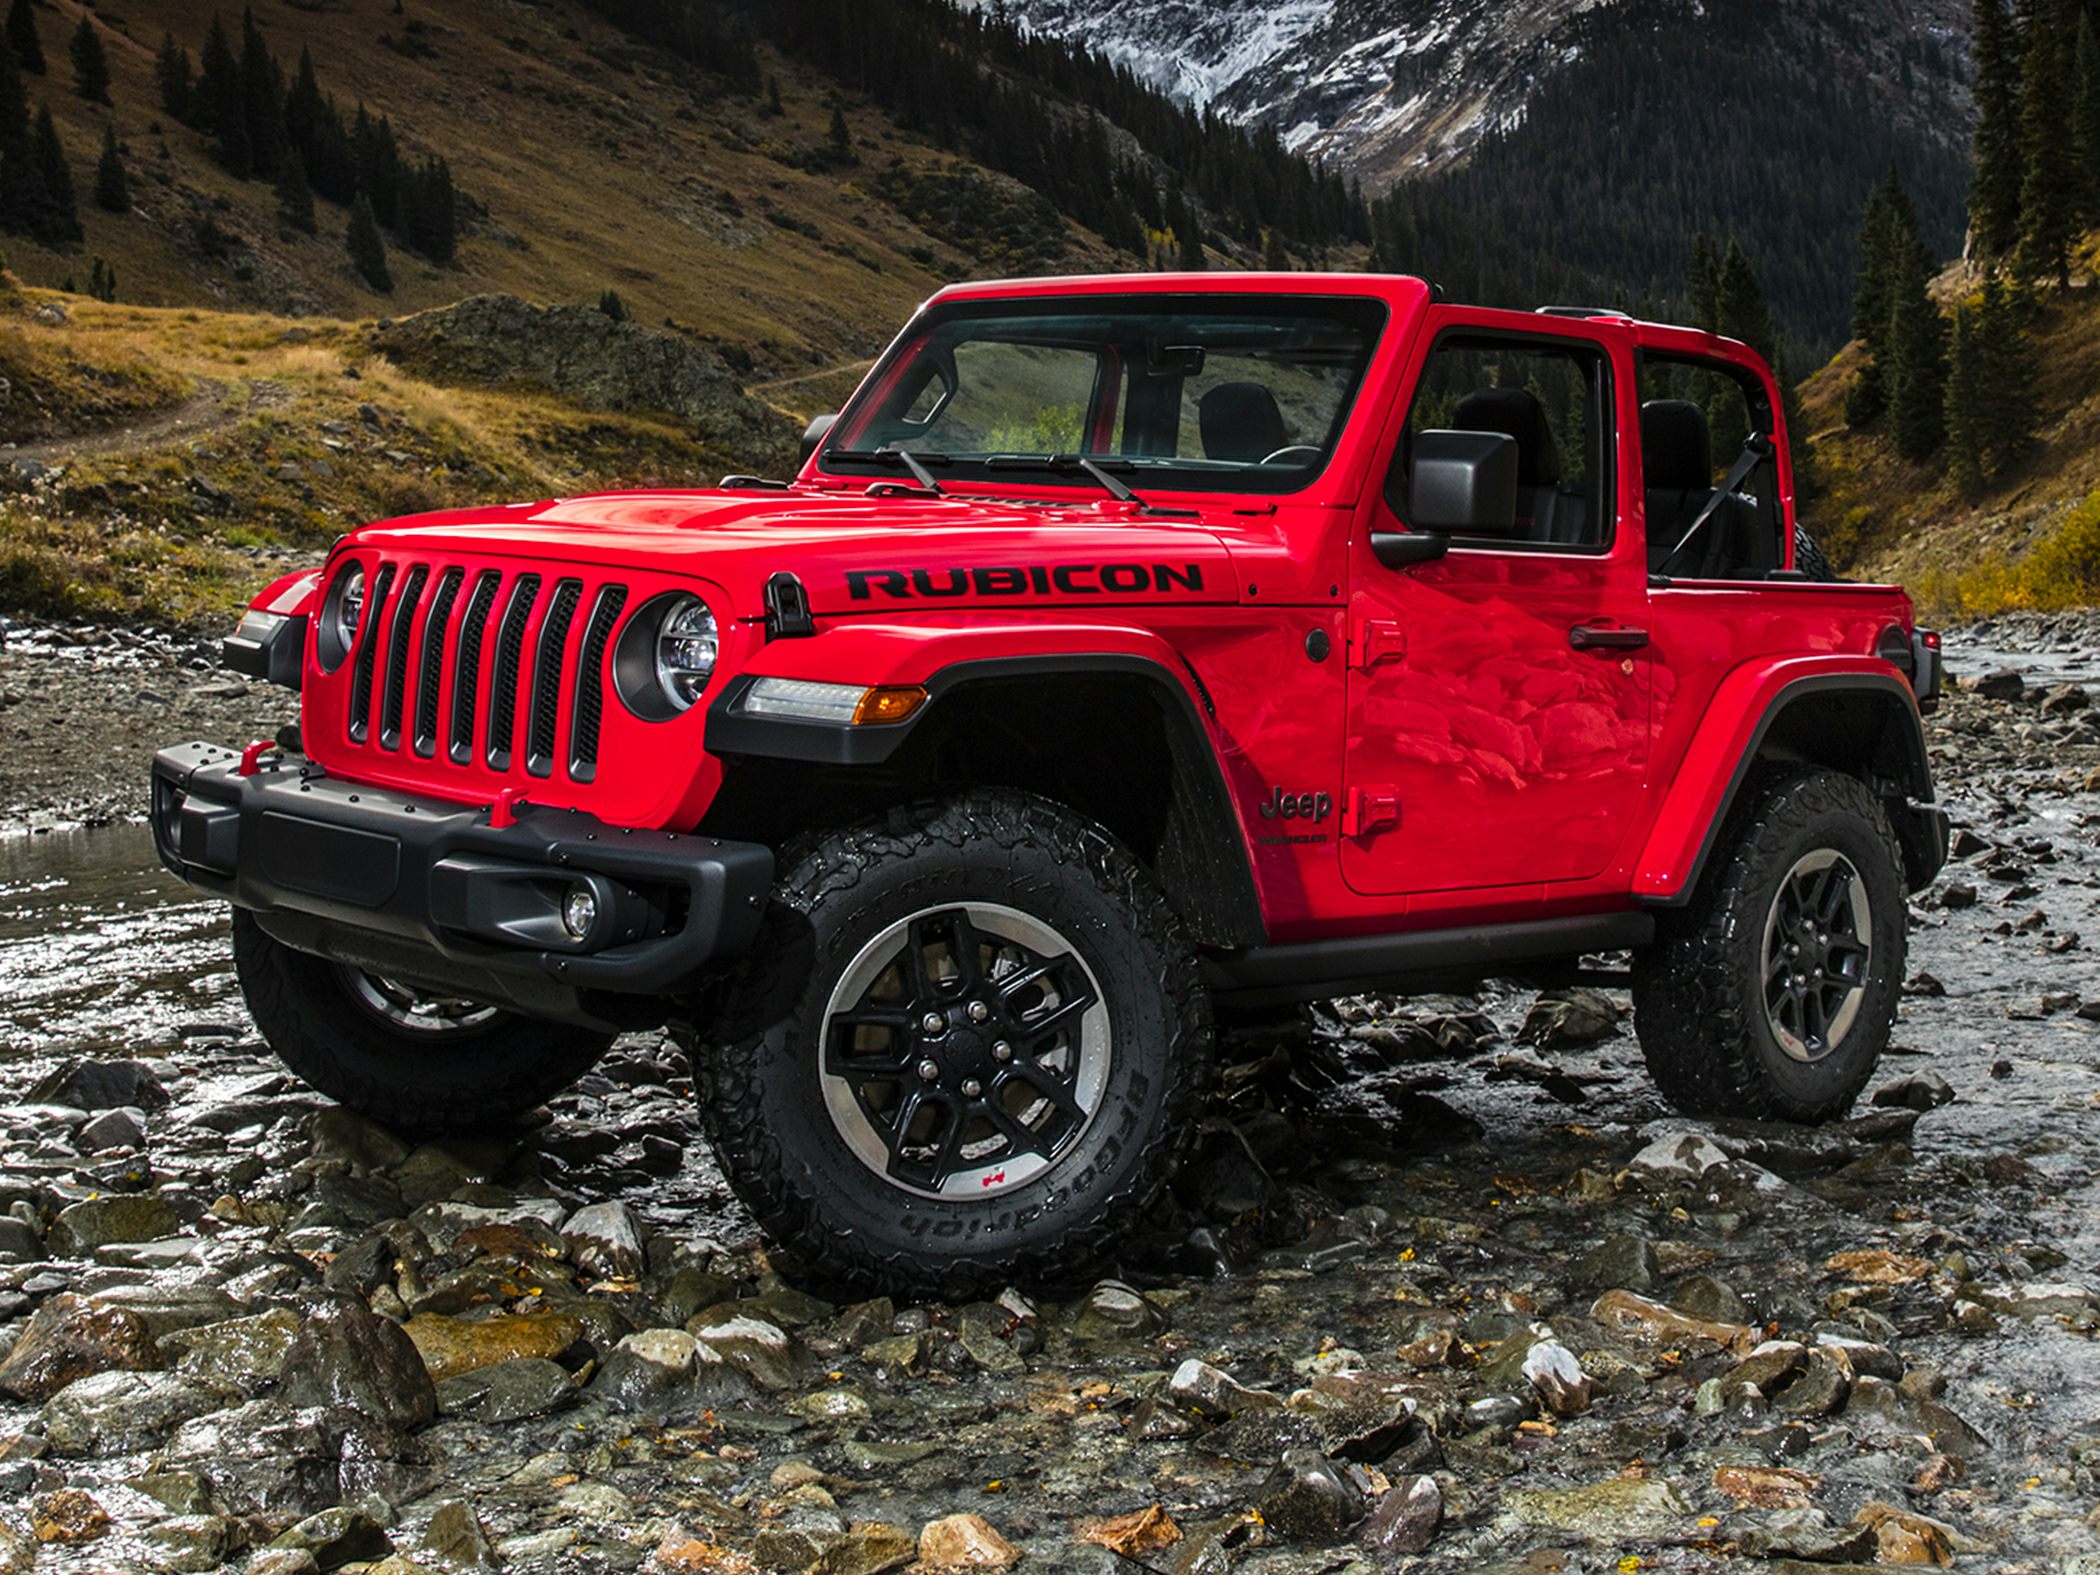 Jeep Wrangler Prices, Reviews and New Model Information - Autoblog